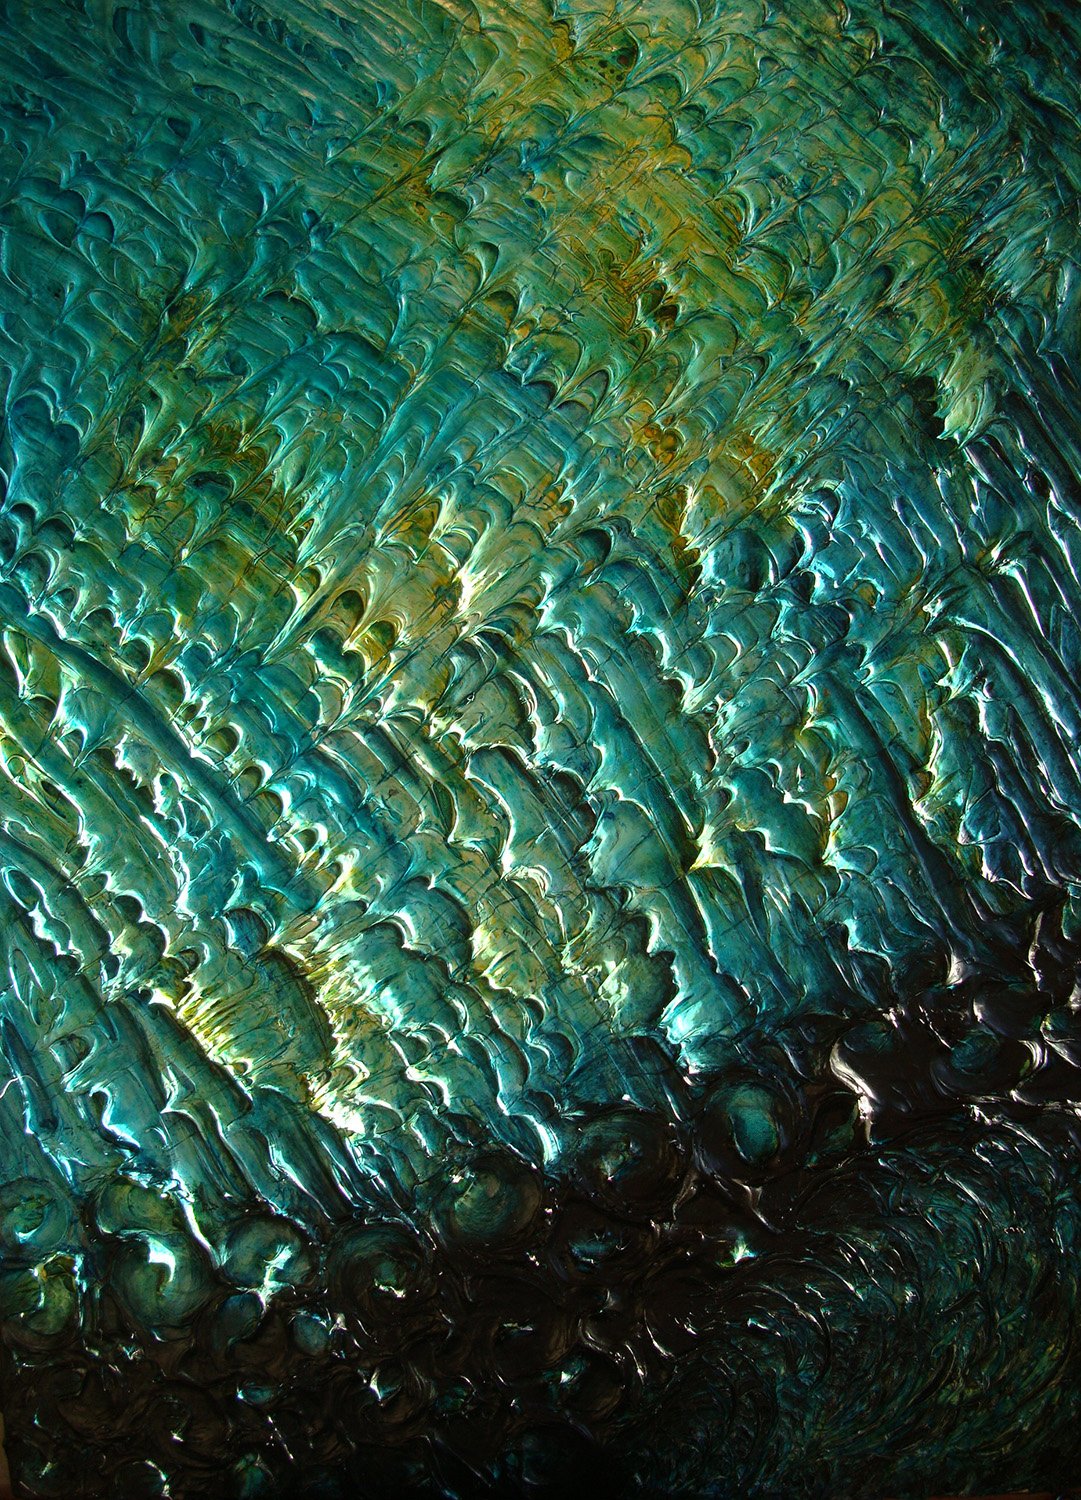   Blue is Turning , 2010, mixed media, 40” x 30” 